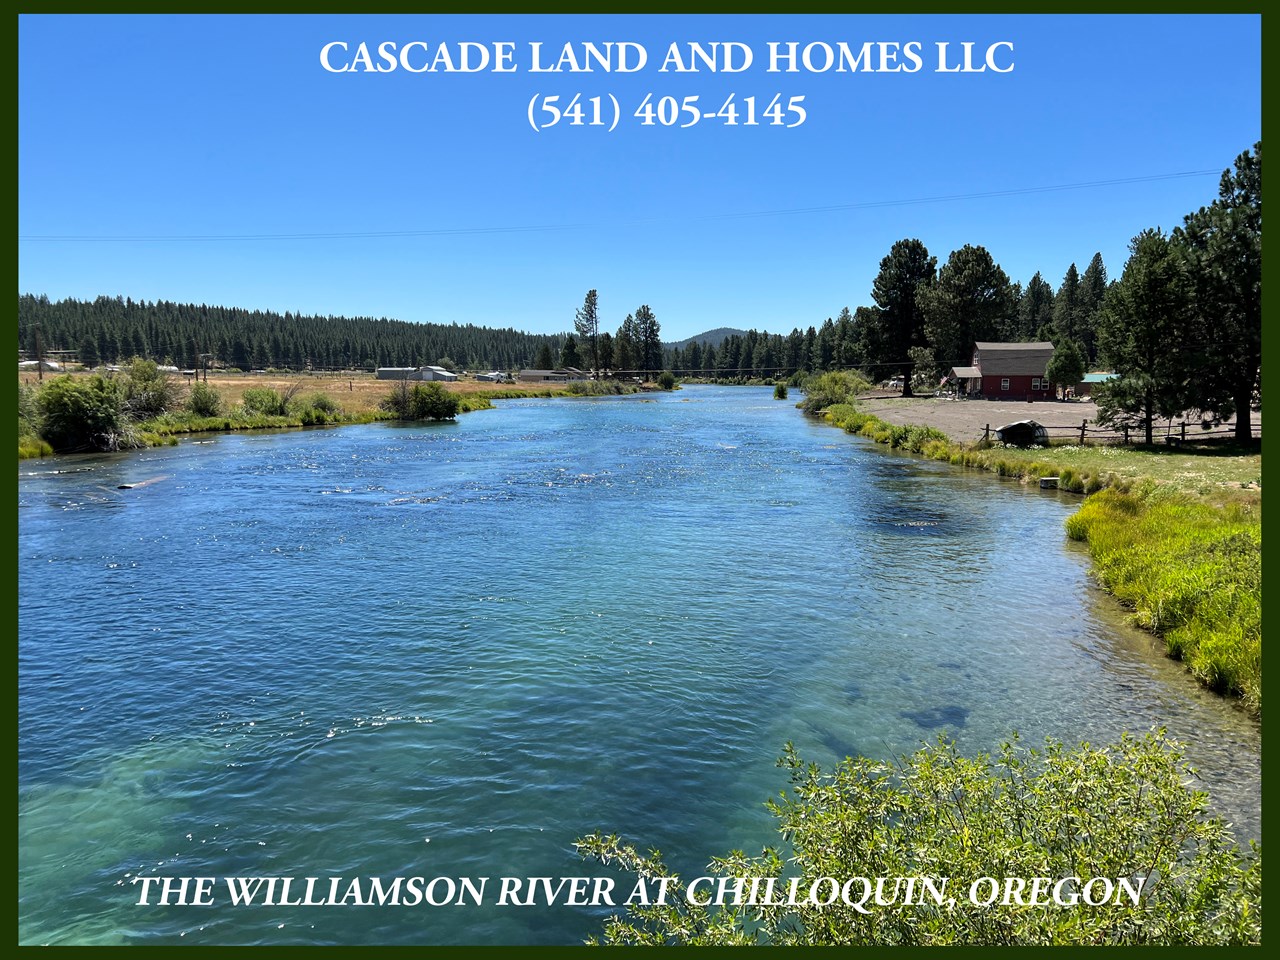 this photo was taken at the bridge over the river that leads to the property, about 1/4 of a mile away. this is the williamson river as it flows into chiloquin. the sprague river meets the williamson river just south of town as they flow on to the upper klamath lake. both offer world-class trophy trout fishing! the water is so clear, you can see every rock, even in the deepest channel of the river!